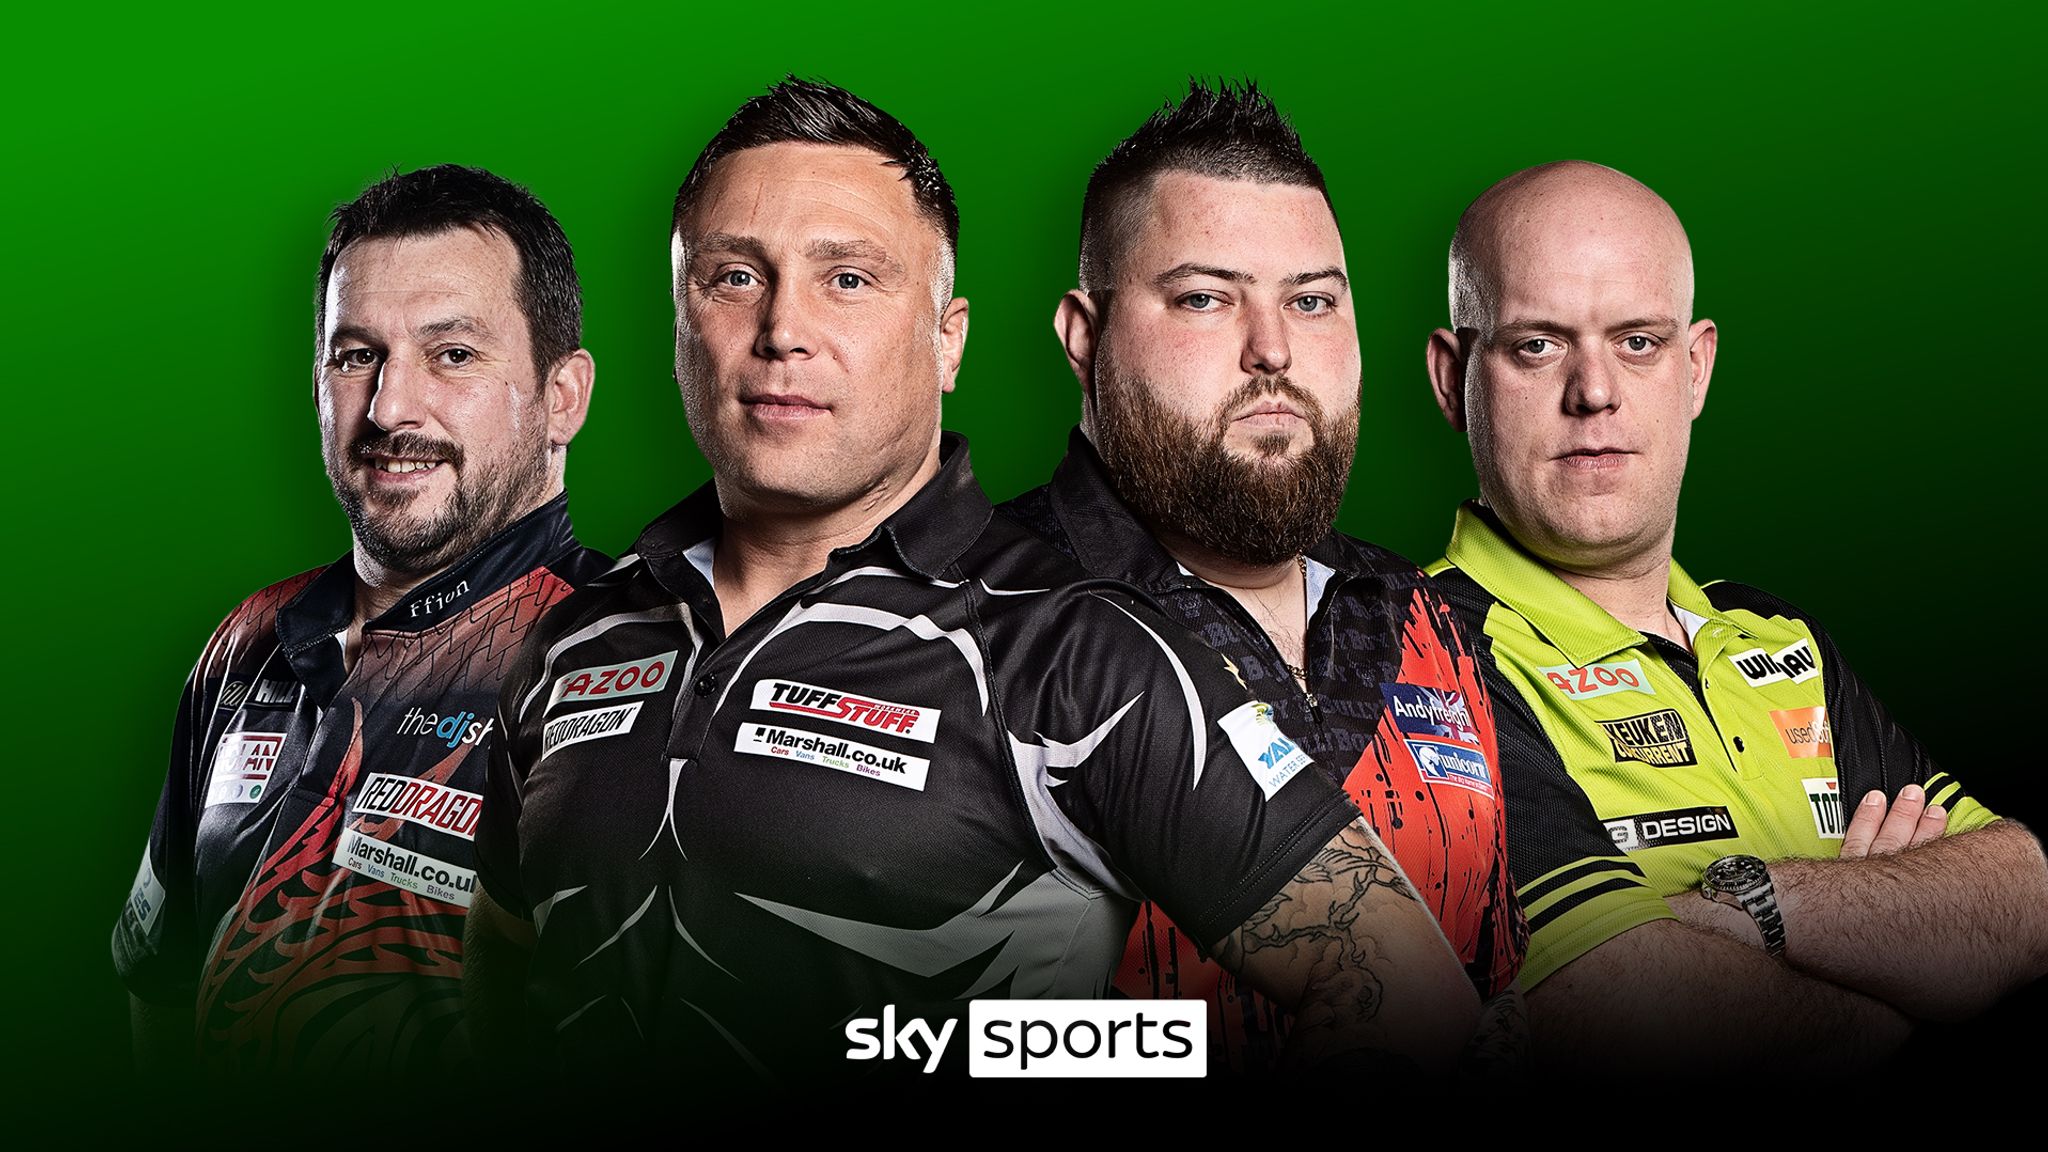 Premier League Darts Play-Off Predictions with Gerwyn Price, Michael Smith, Michael van Gerwen and Jonny Clayton in action Darts News Sky Sports